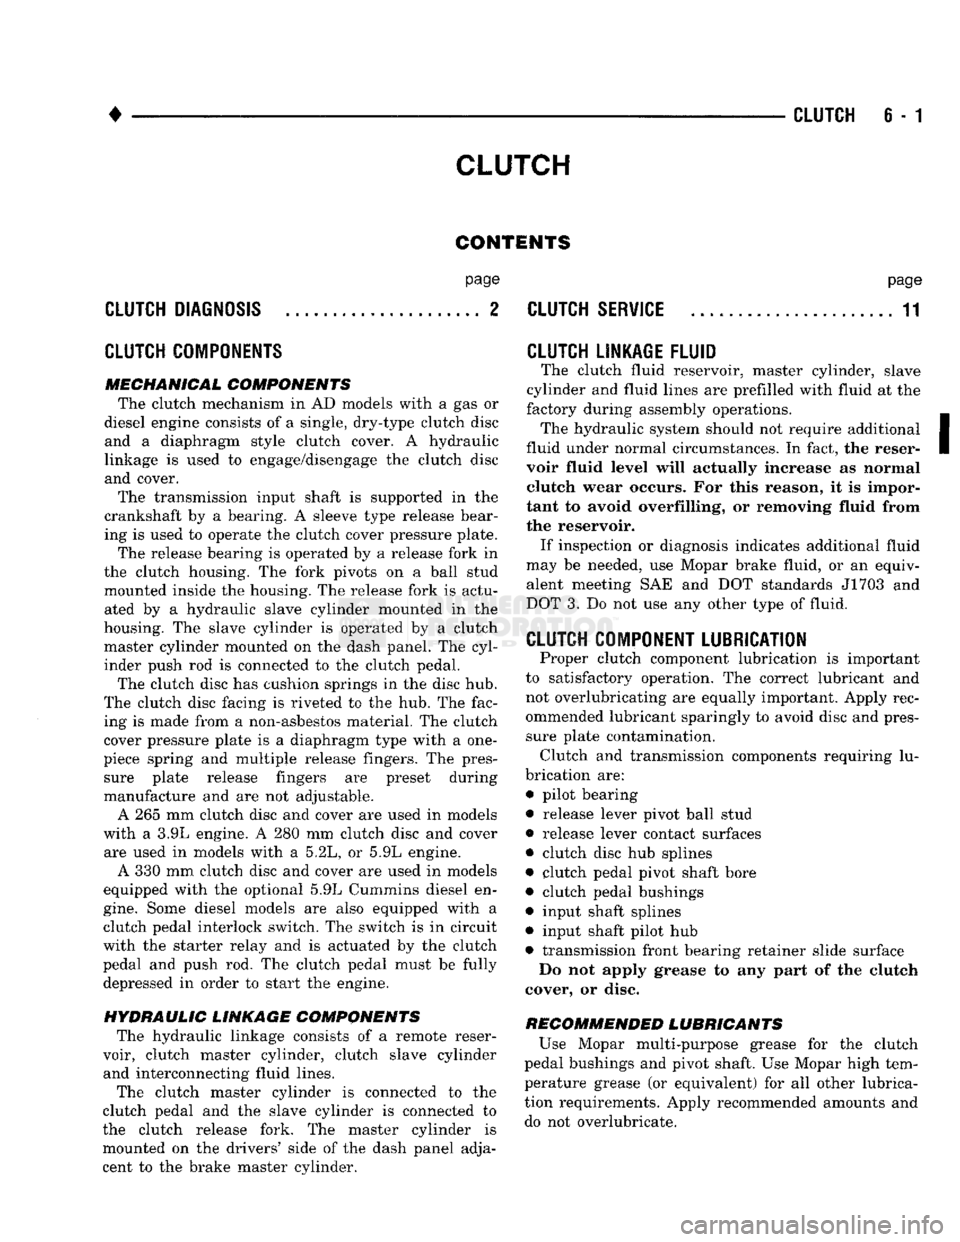 DODGE TRUCK 1993  Service Repair Manual 
CLUTCH
 6 - 1 

CLUTCH 

CONTENTS 
 page 

CLUTCH
 DIAGNOSIS
 2 

CLUTCH
 COMPONENTS 

MECHANICAL COMPONENTS 
 The clutch mechanism
 in
 AD
 models with
 a gas or 

diesel engine consists
 of a
 sing